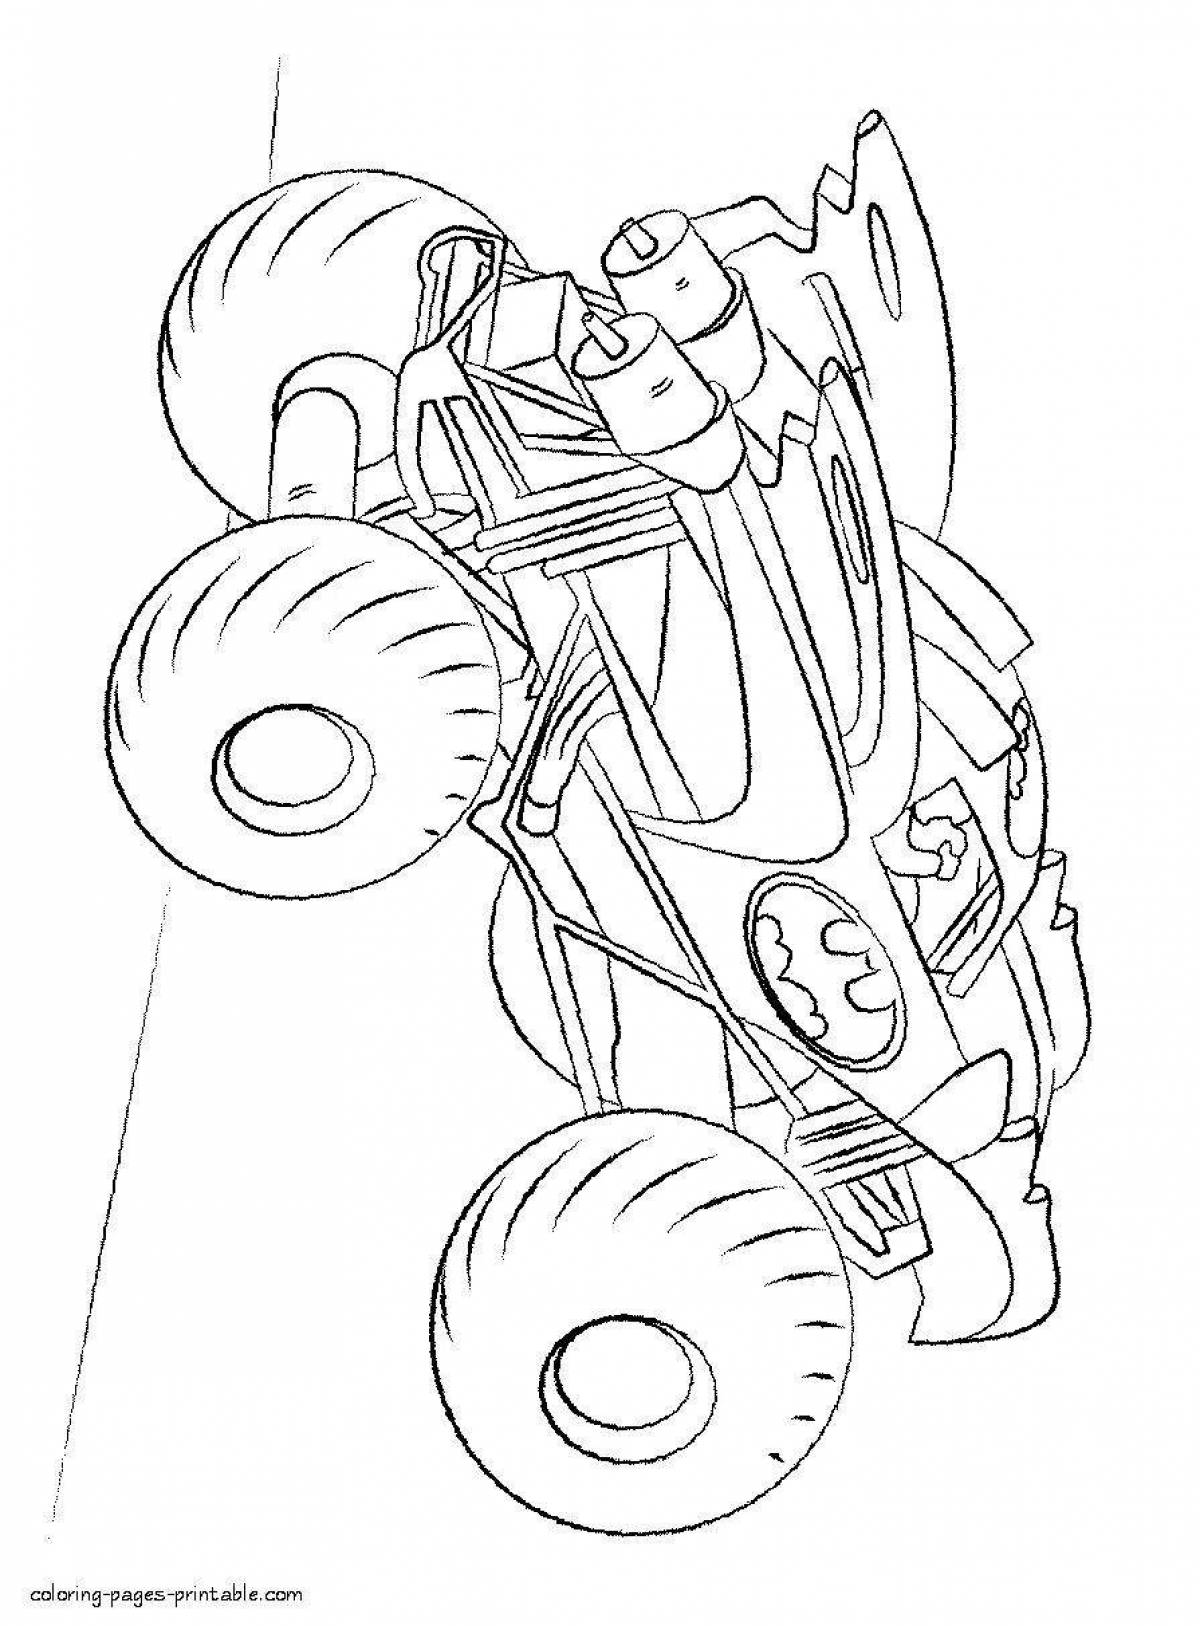 Radiant coloring page monster truck динозавр